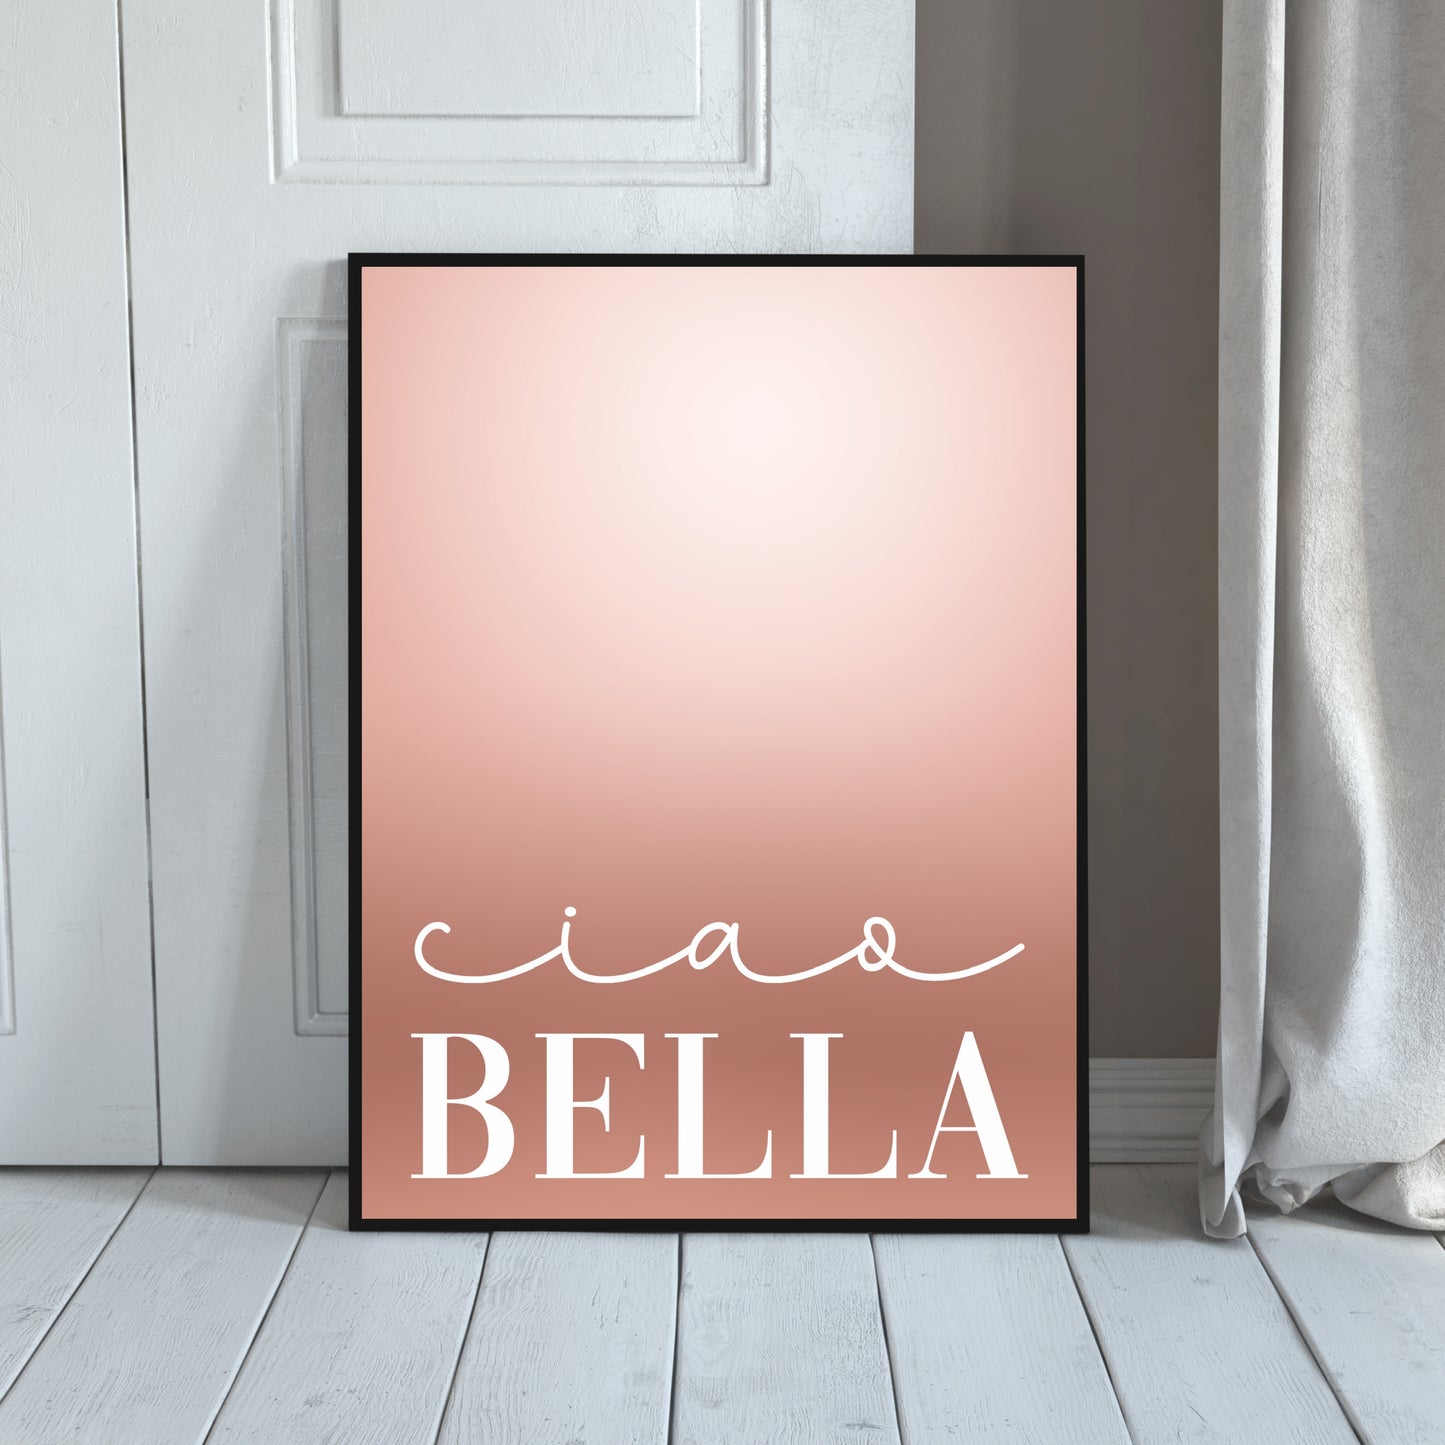 "Ciao Bella" In White With Rose Gold Background, Printable Art